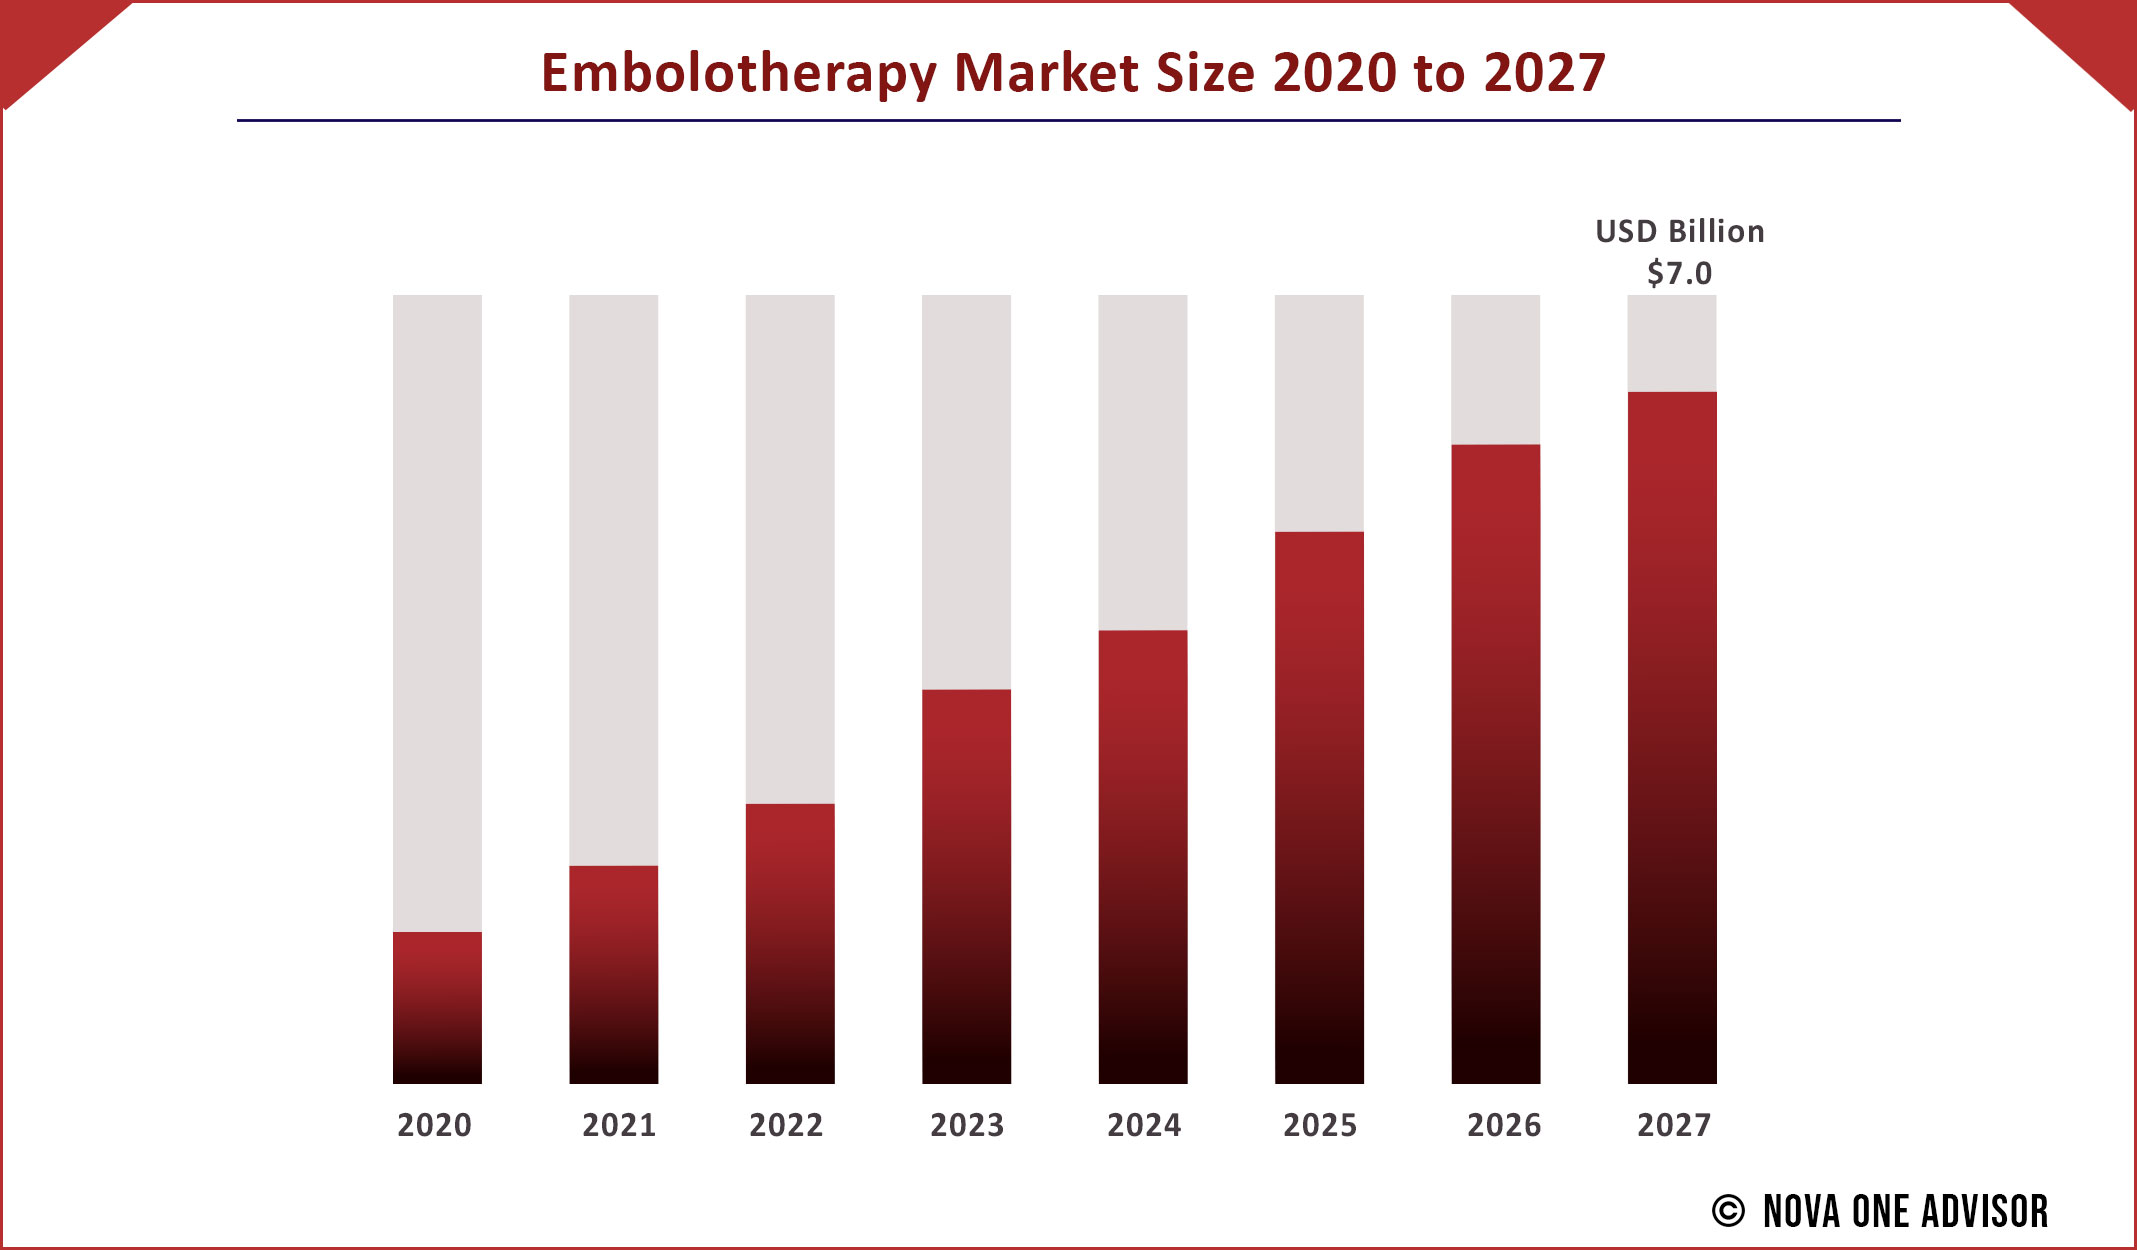 Embolotherapy Market Size 2020 to 2027